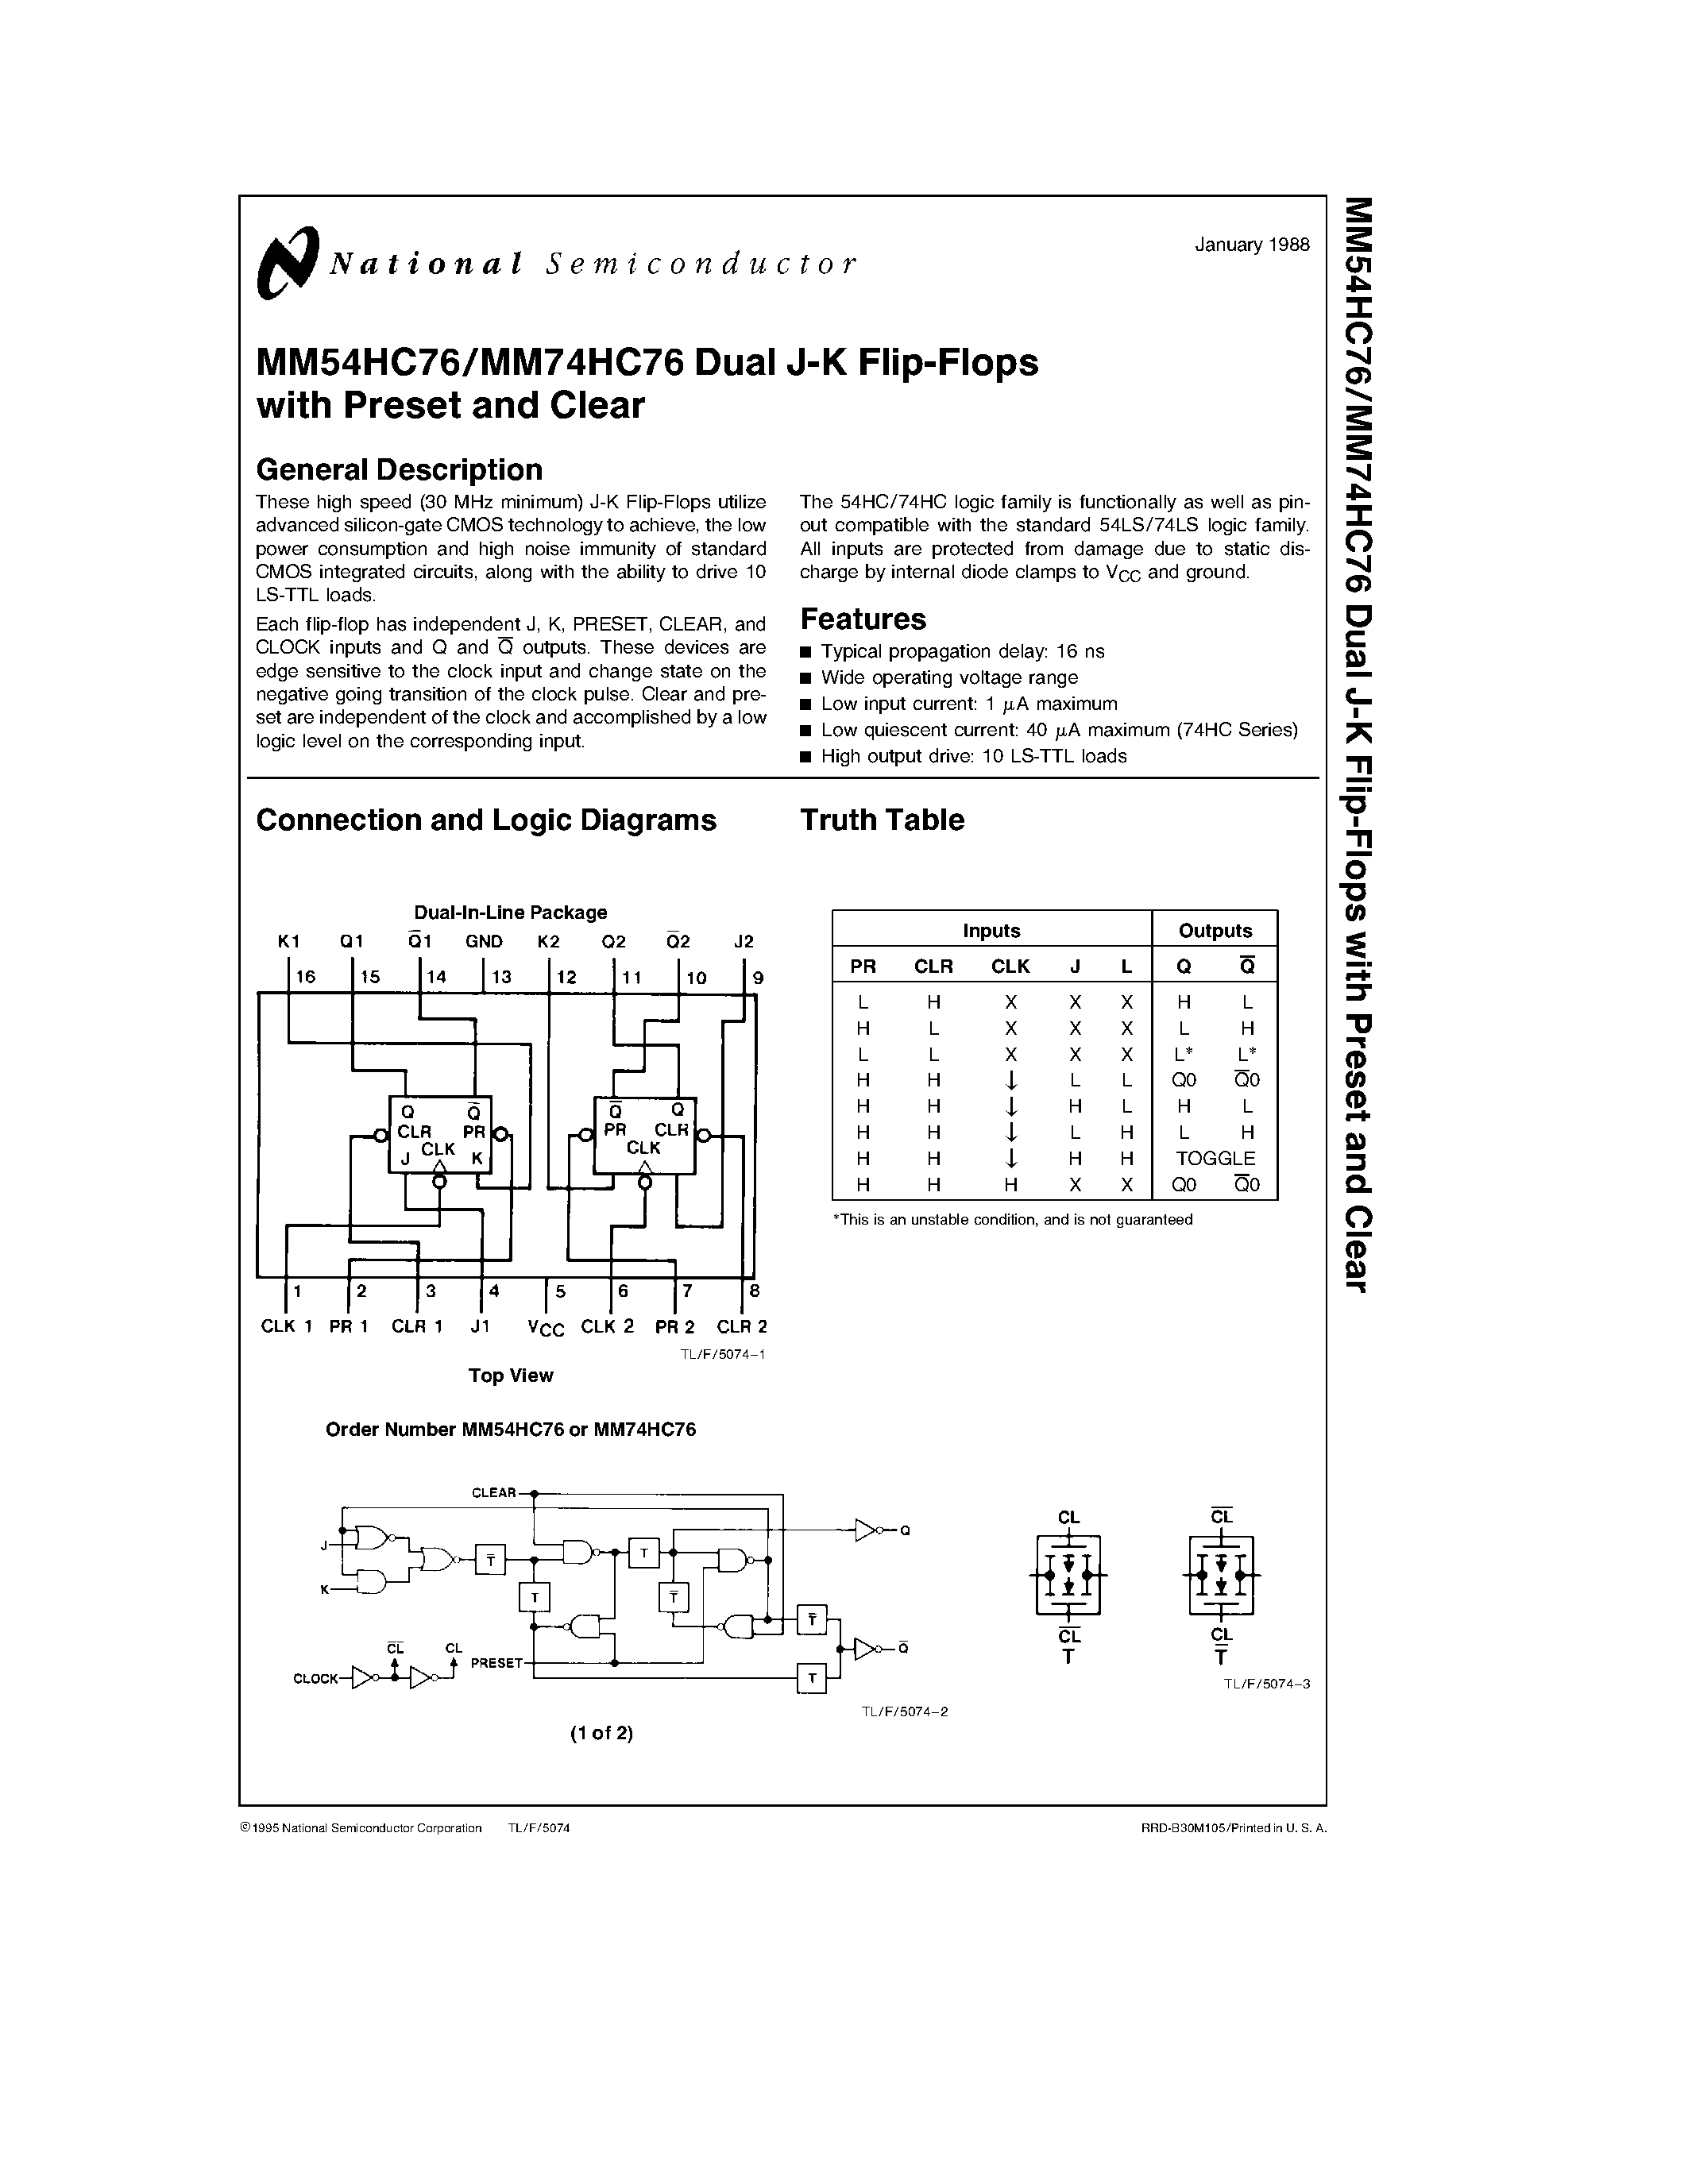 Datasheet MM74HC76 - Dual J-K Flip-Flops with Preset and Clear page 1